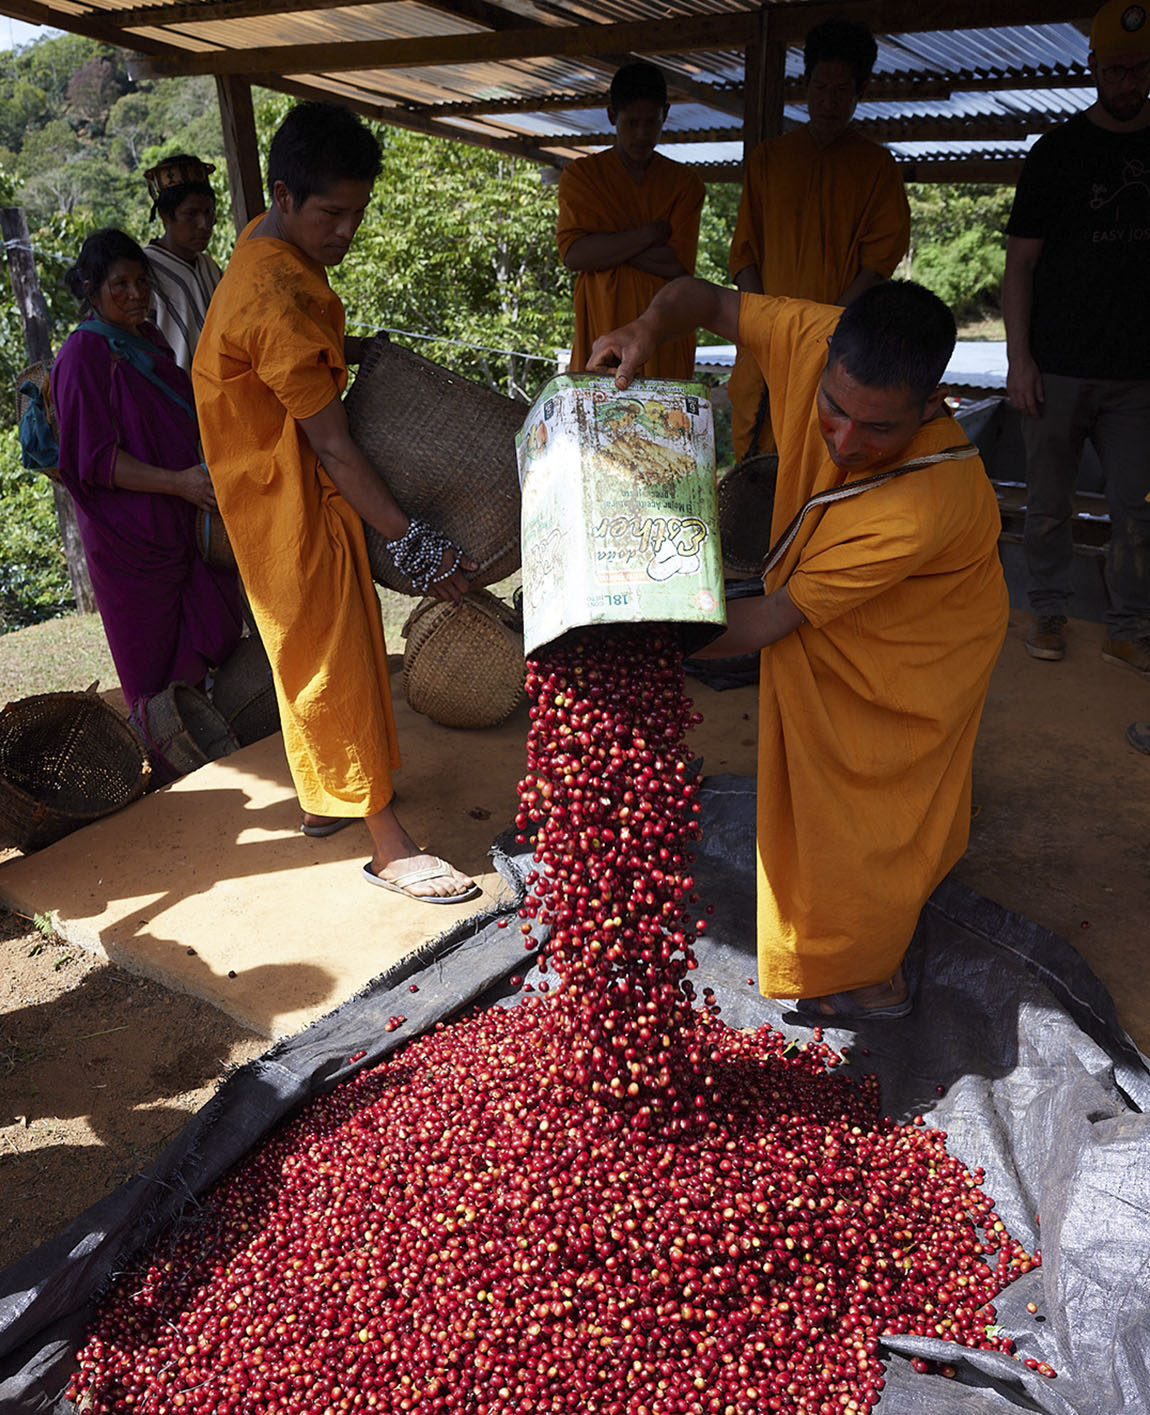 The eco-coffee that preserves native forest and improves the lives of indigenous people